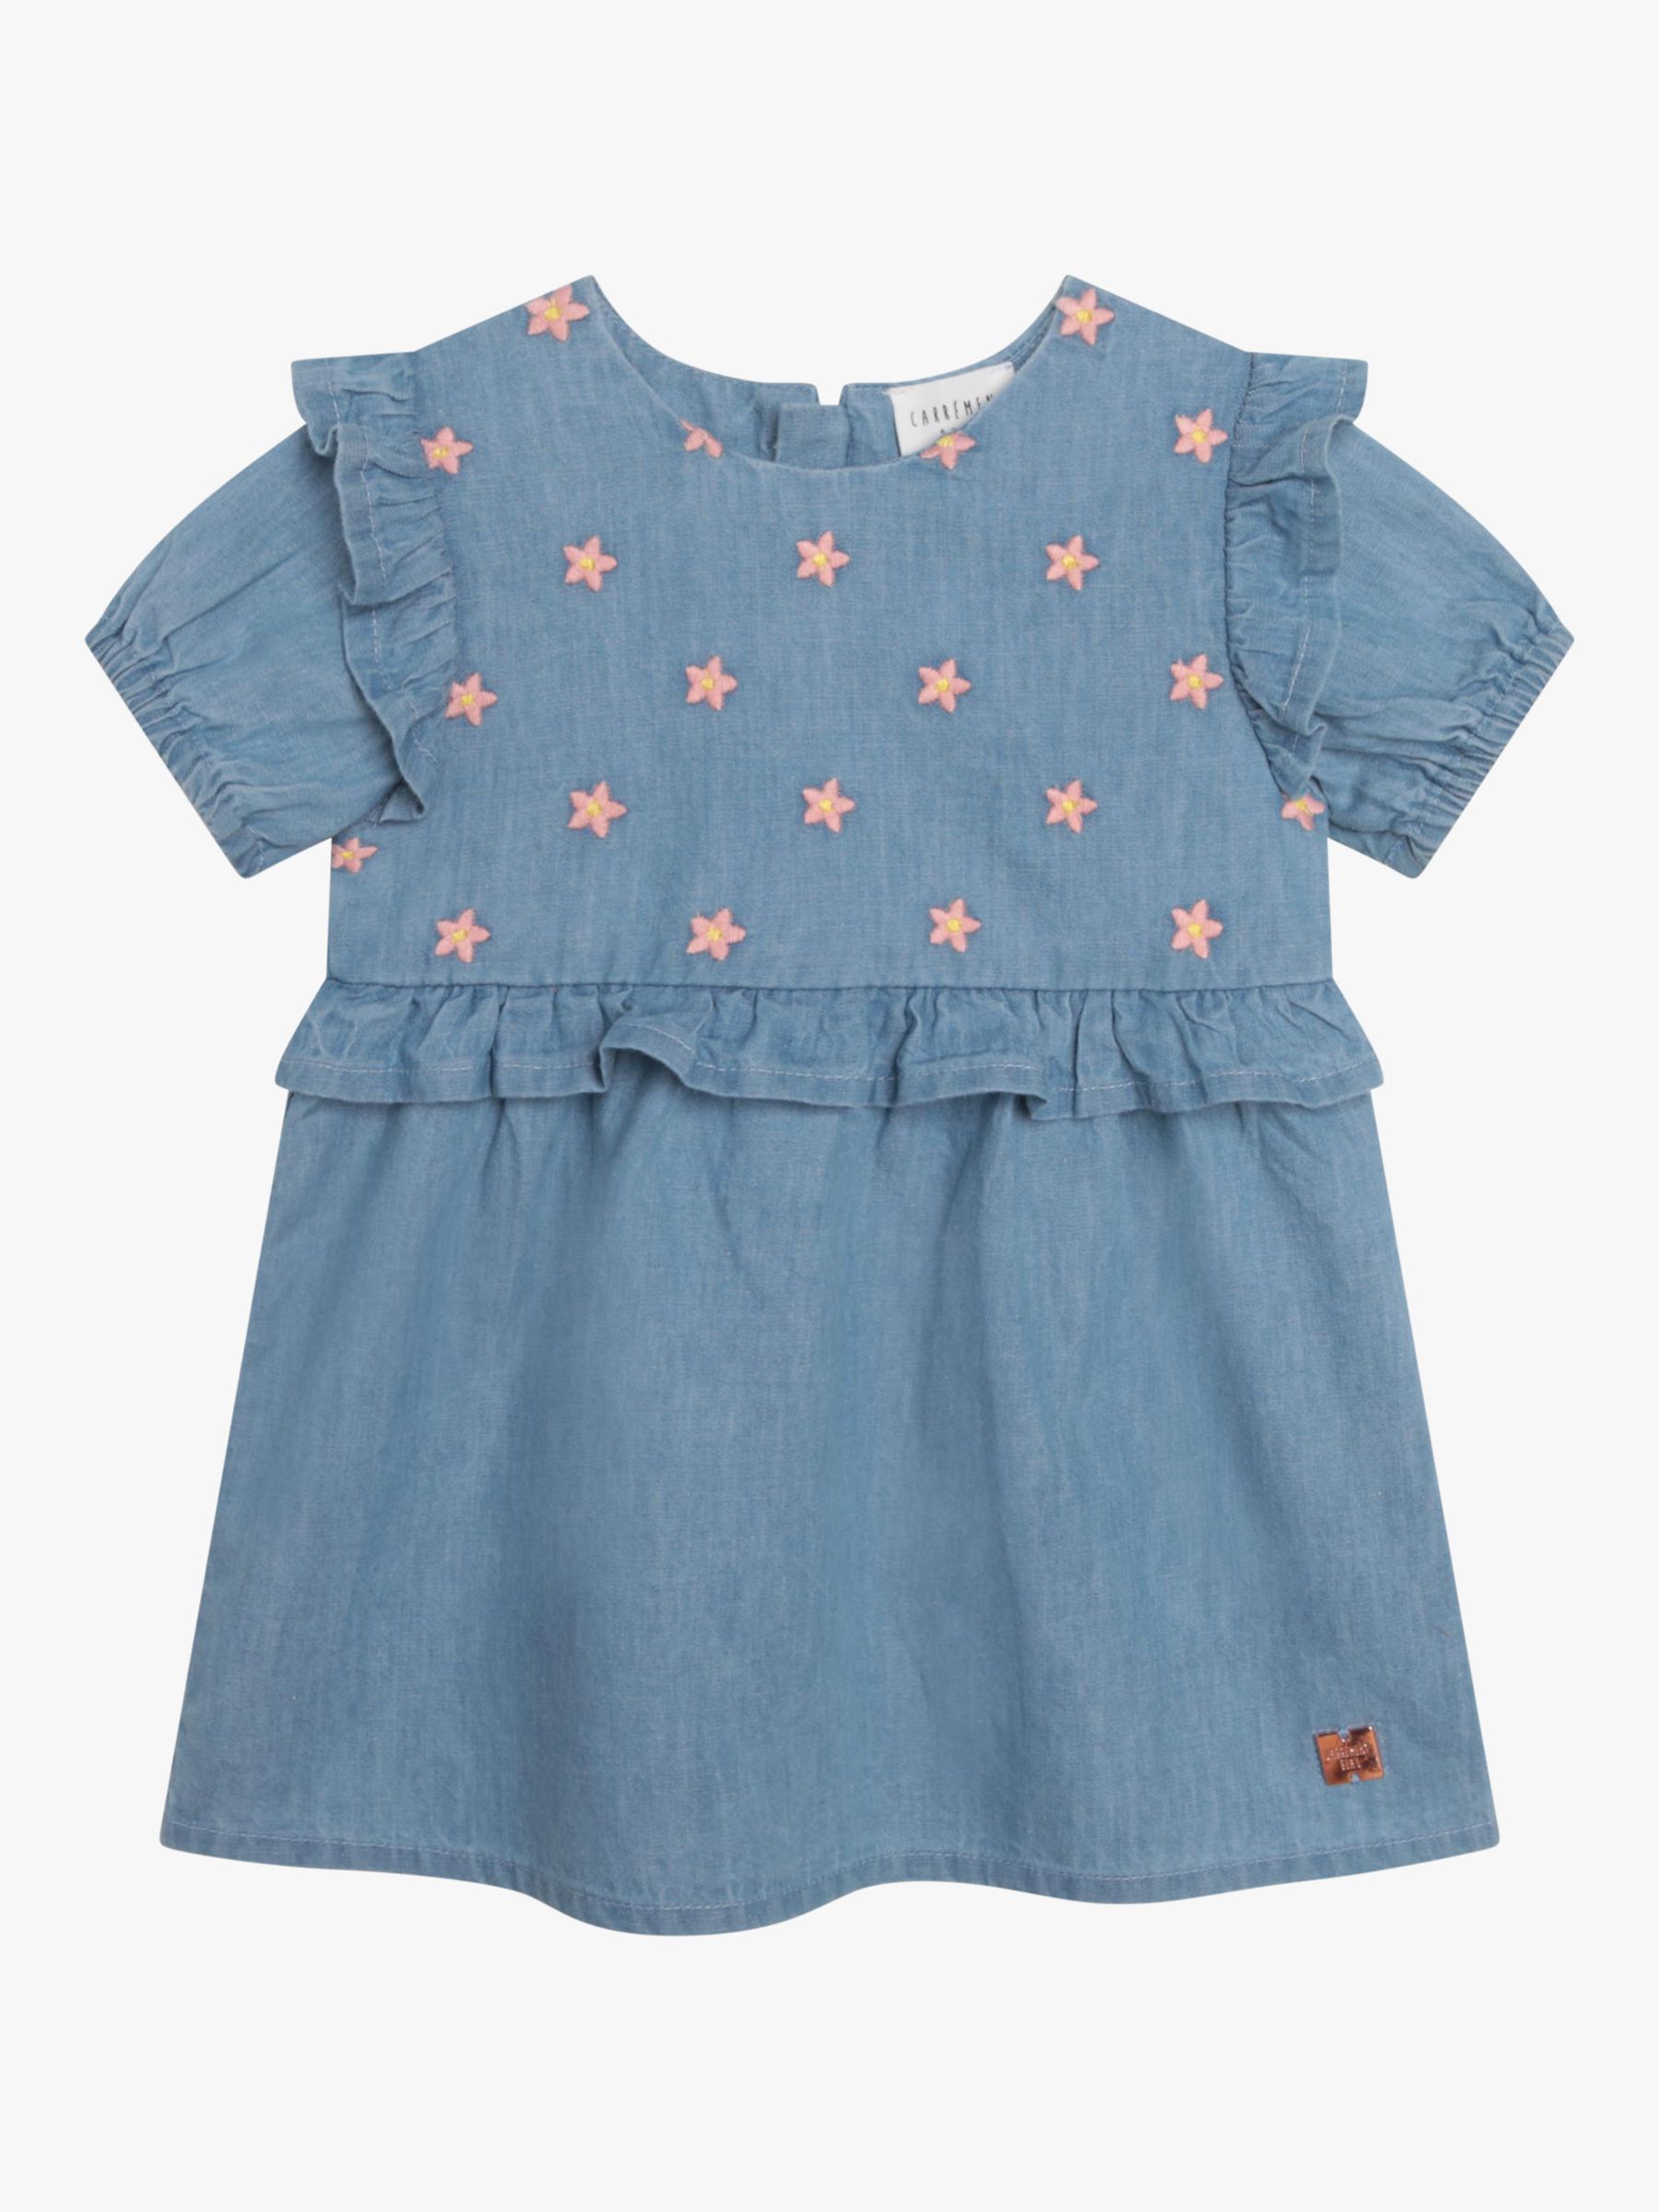 Carrément Beau Baby Floral Embroidered Light Denim Dress, Blue, 6 years